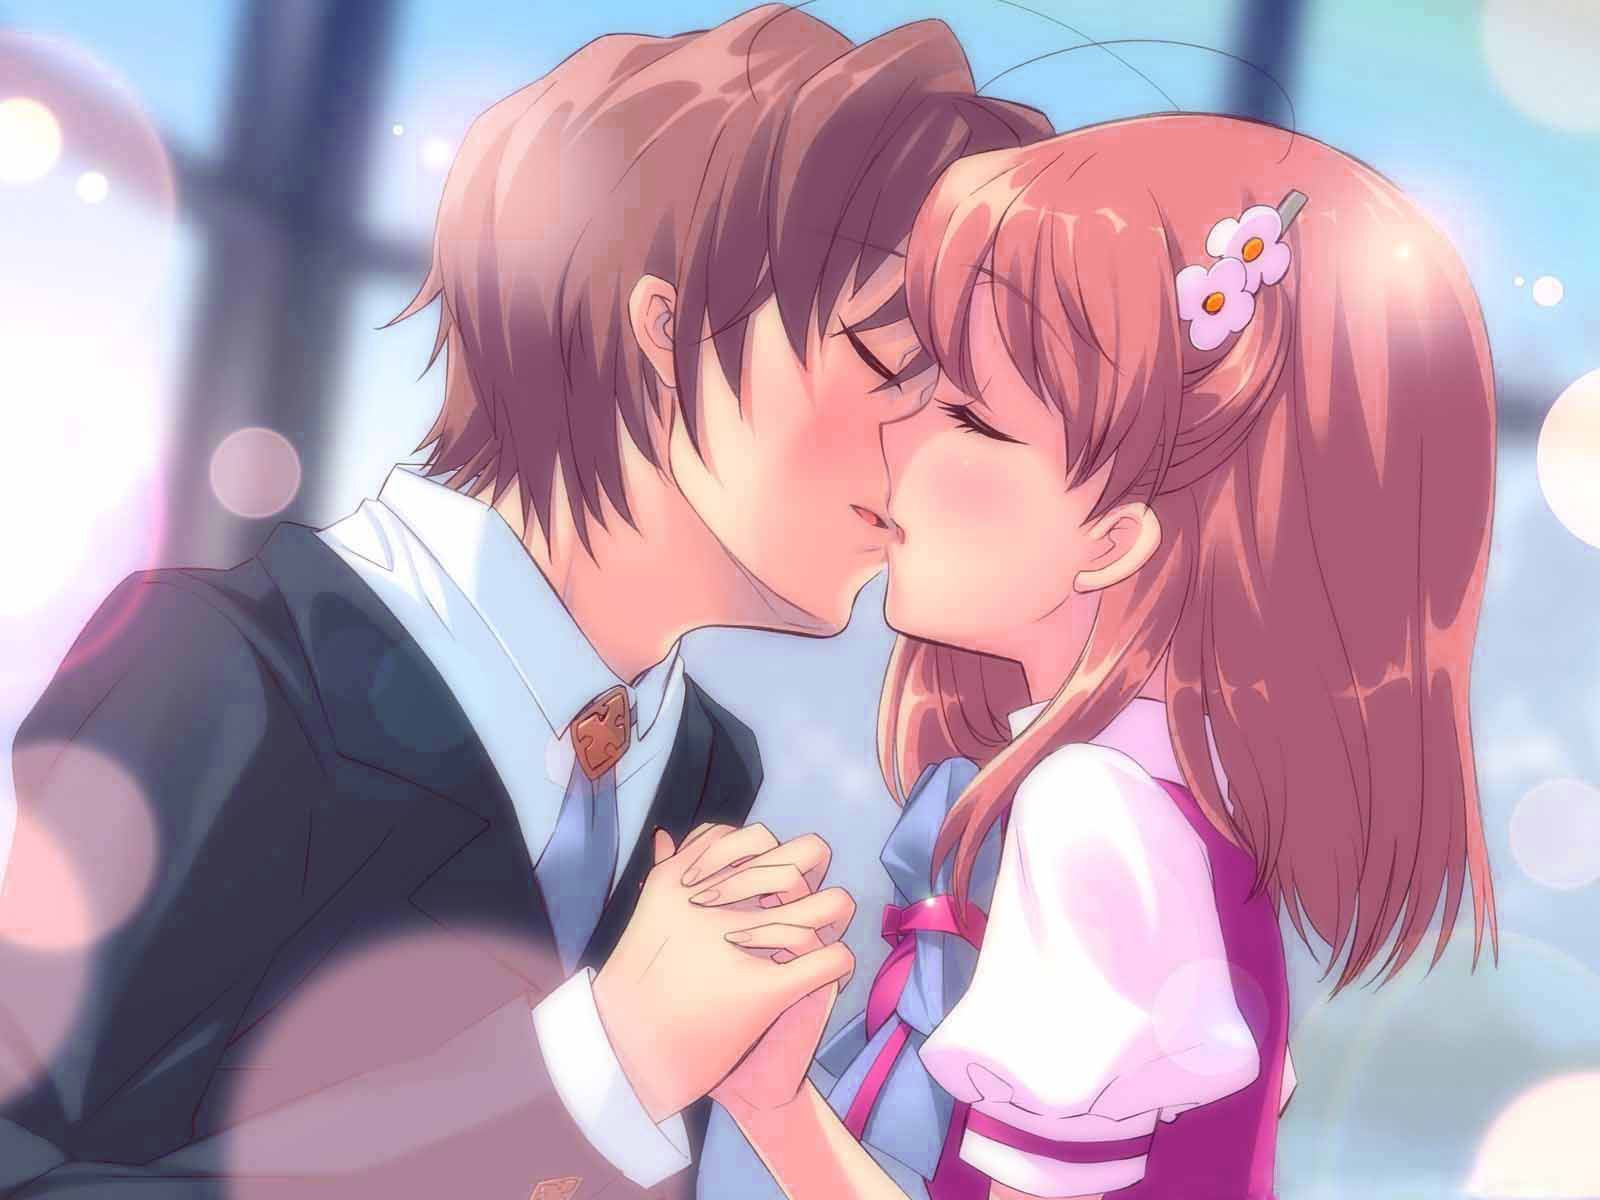 Happy Kiss Day Animated Wallpaper Kiss Day Image Animated